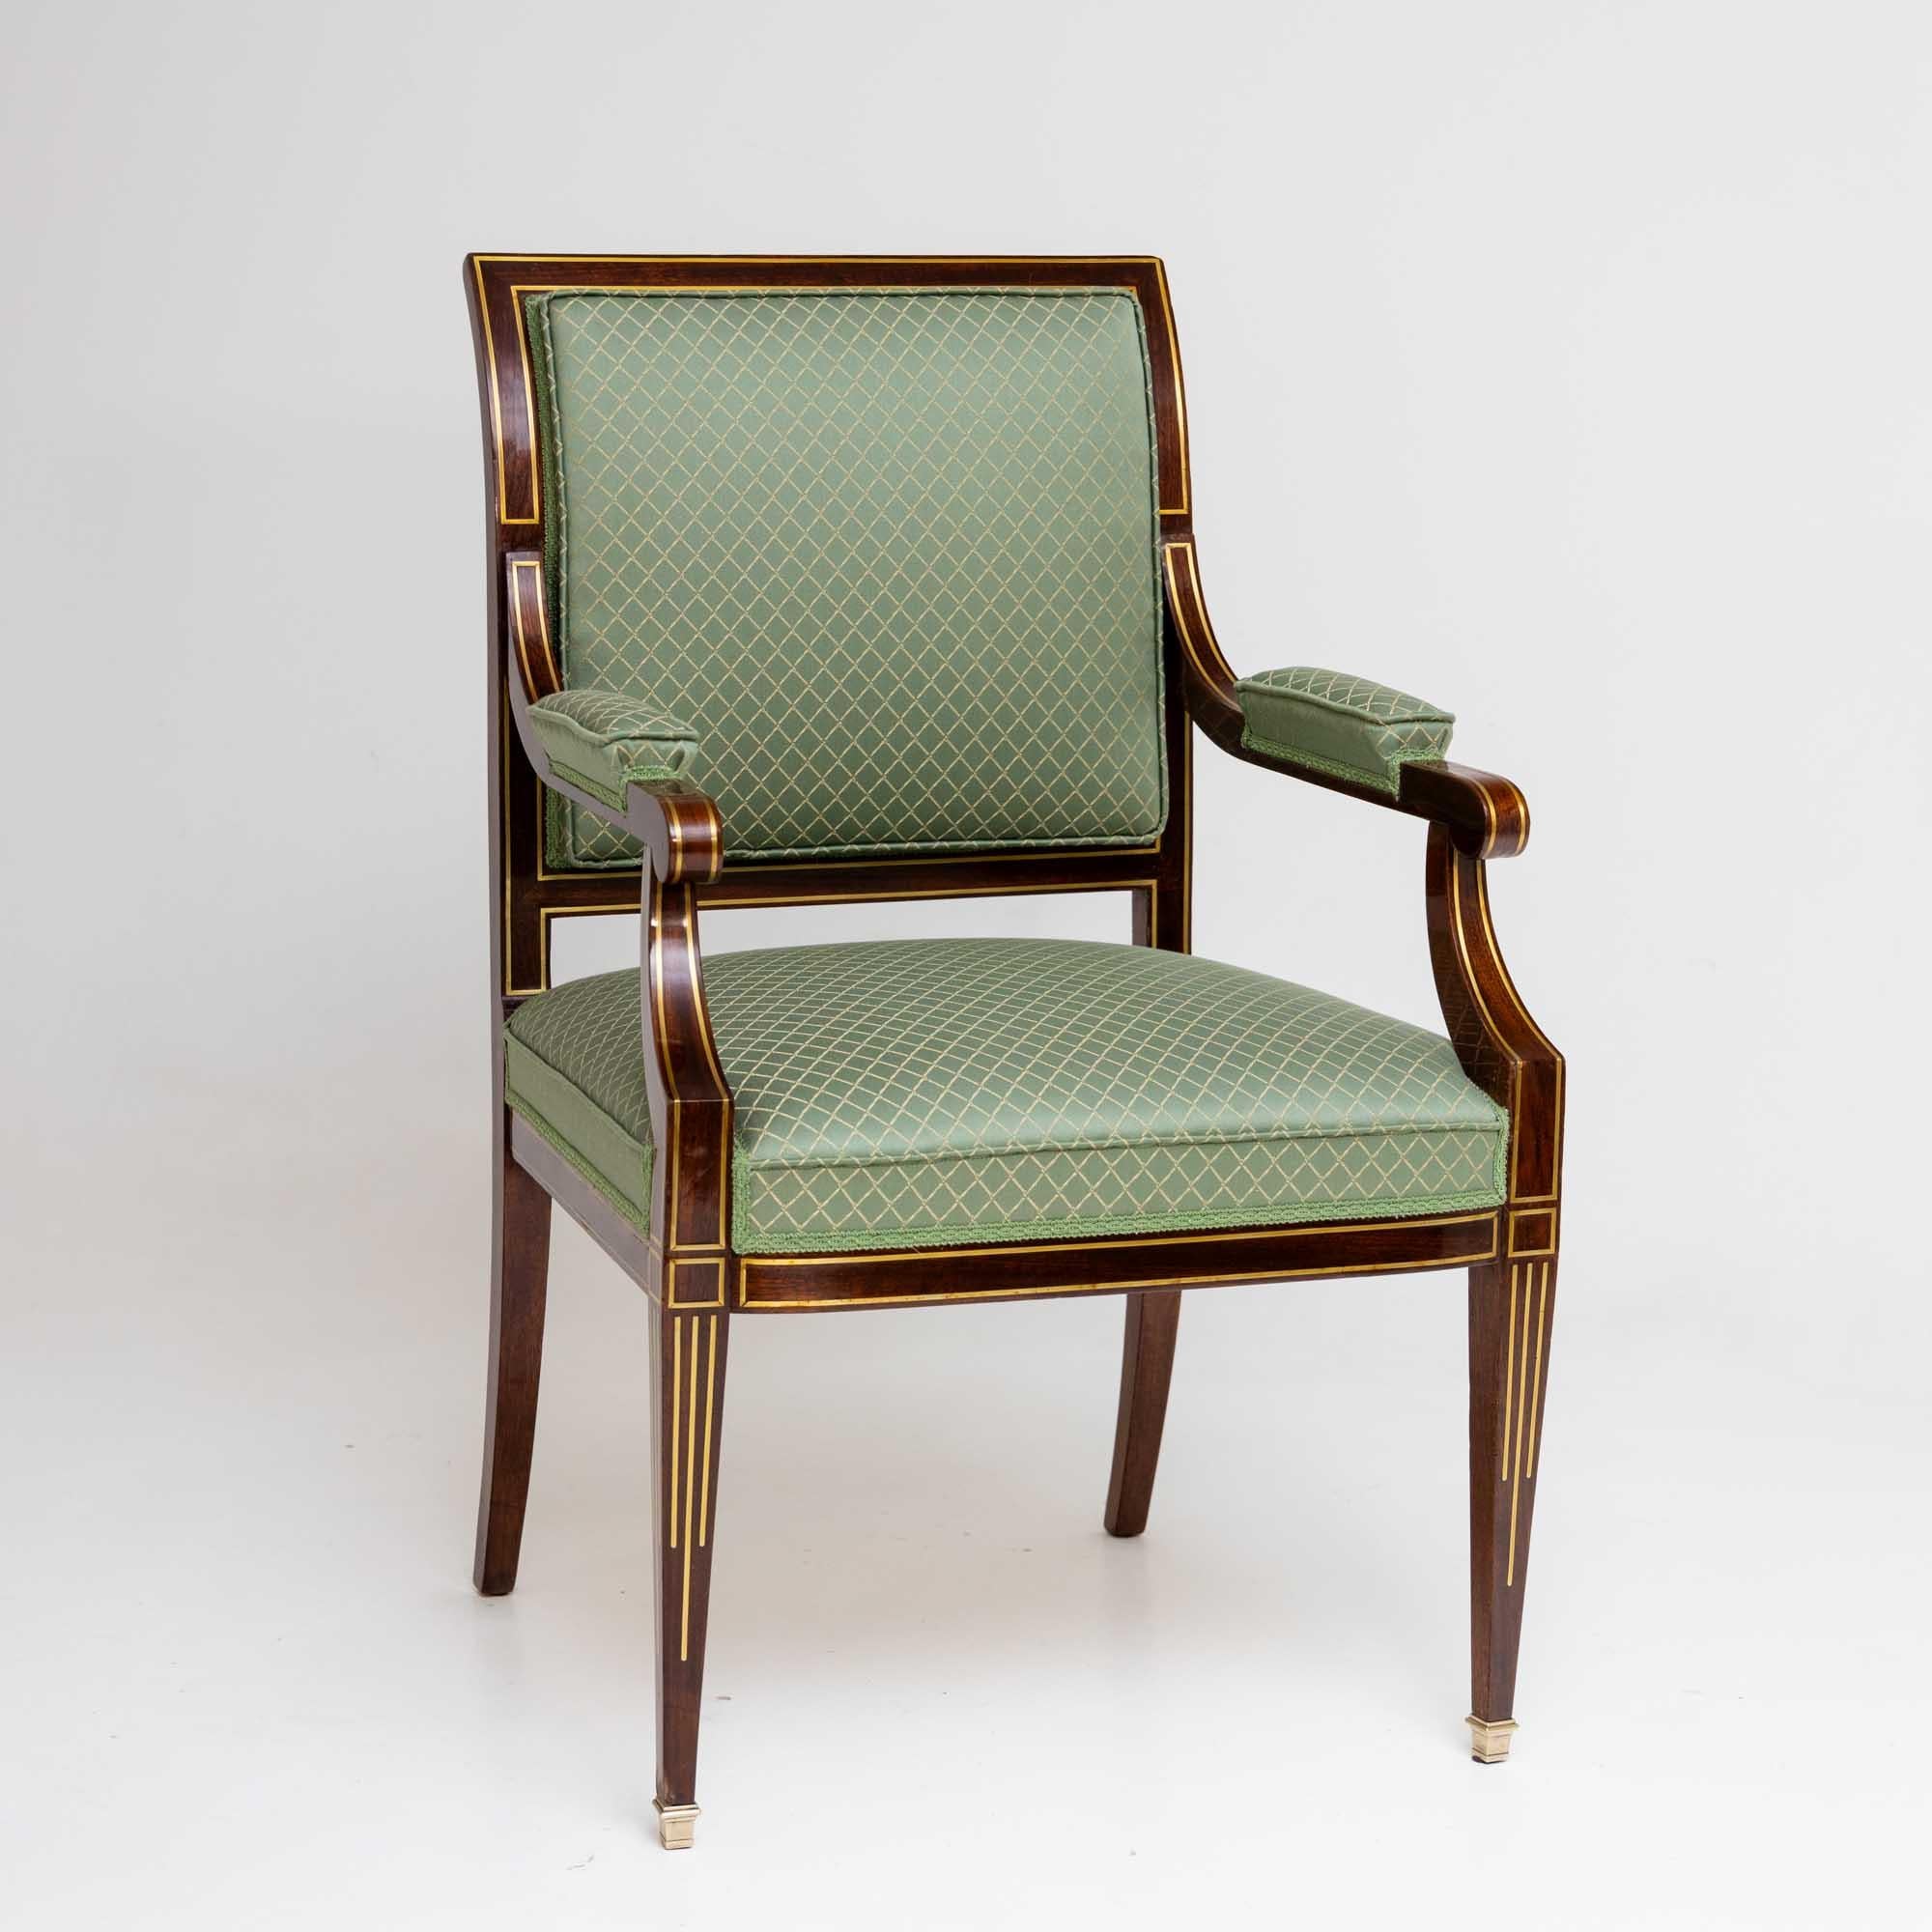 Mahogany armchair with decorative brass thread inlays. The armchair stands on elegant square tapered feet with brass sabots. The chair has been lavishly reupholstered in a light green fabric with a golden diamond pattern. Like the seat and backrest,